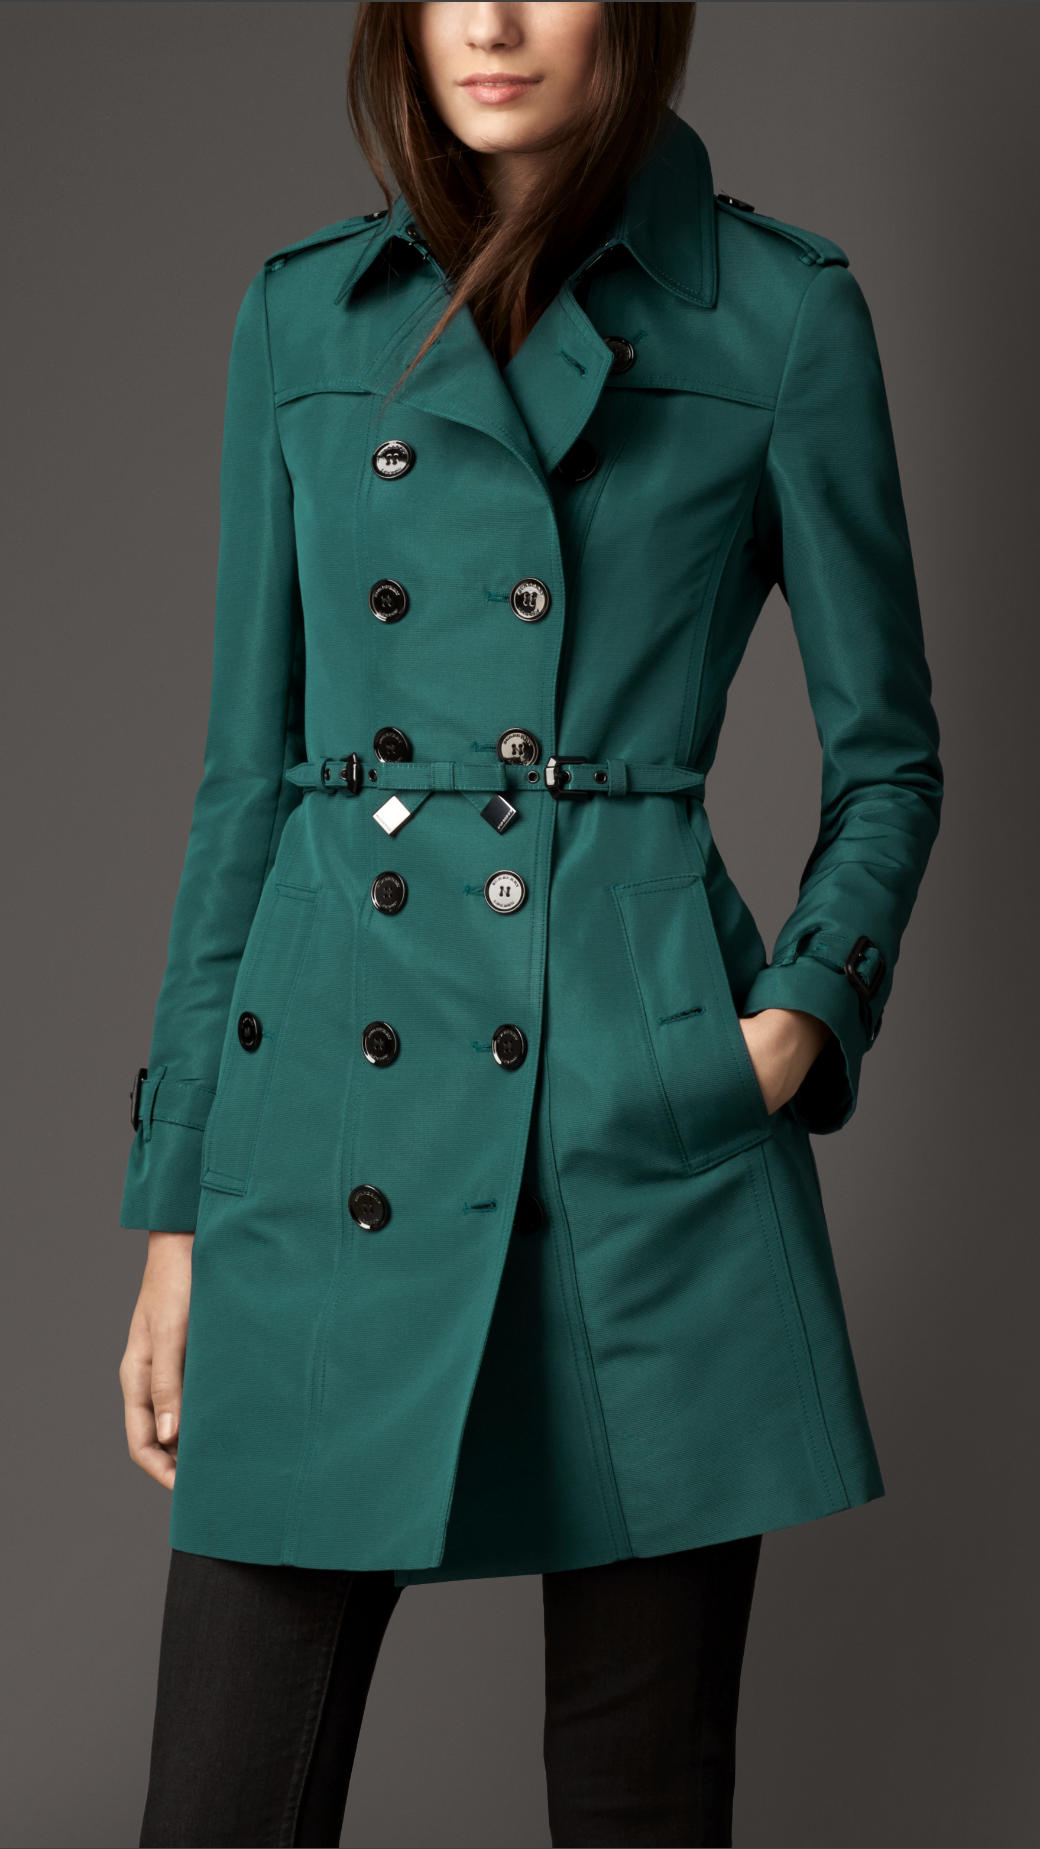 Lyst - Burberry Mid Length Silk Blend Faille Trench Coat in Green